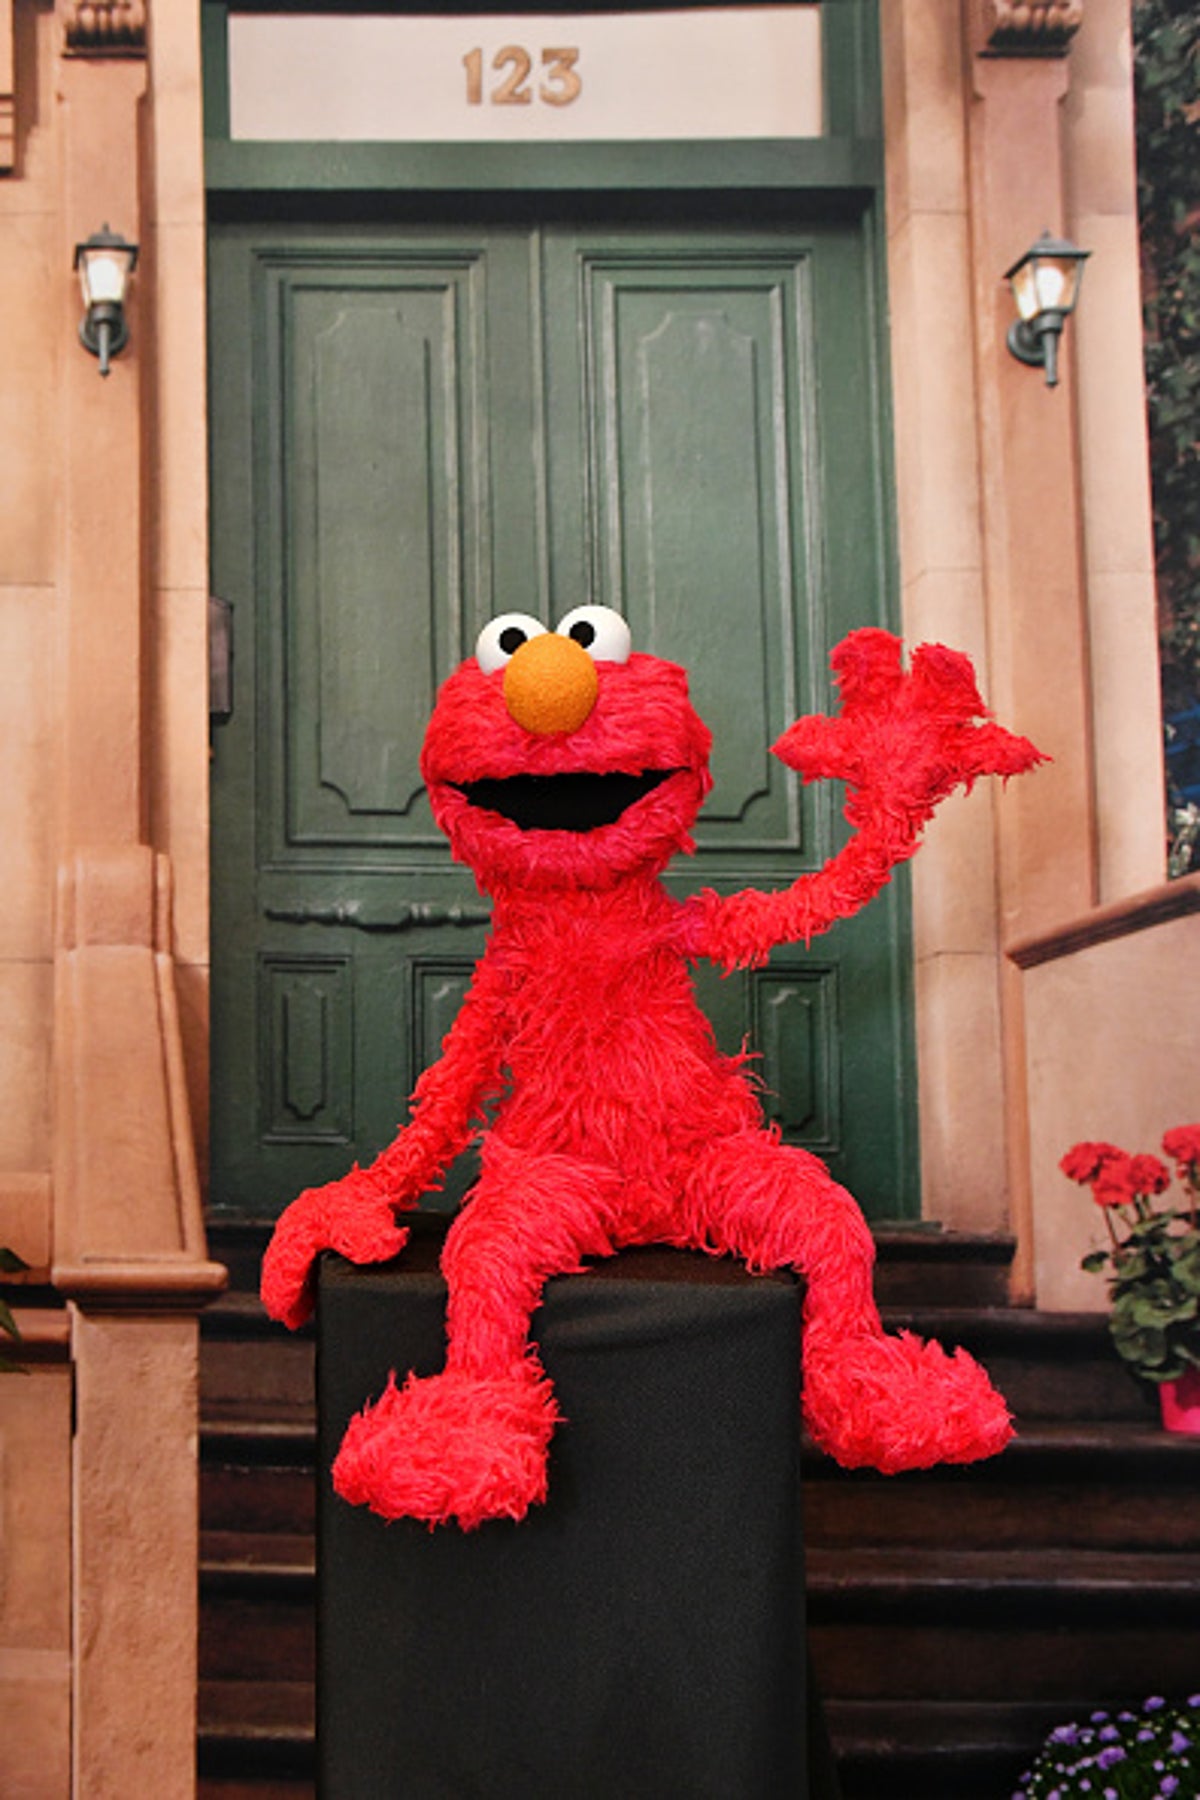 Elmo’s Leap Day post goes viral for creeping people out: ‘I am terrified’